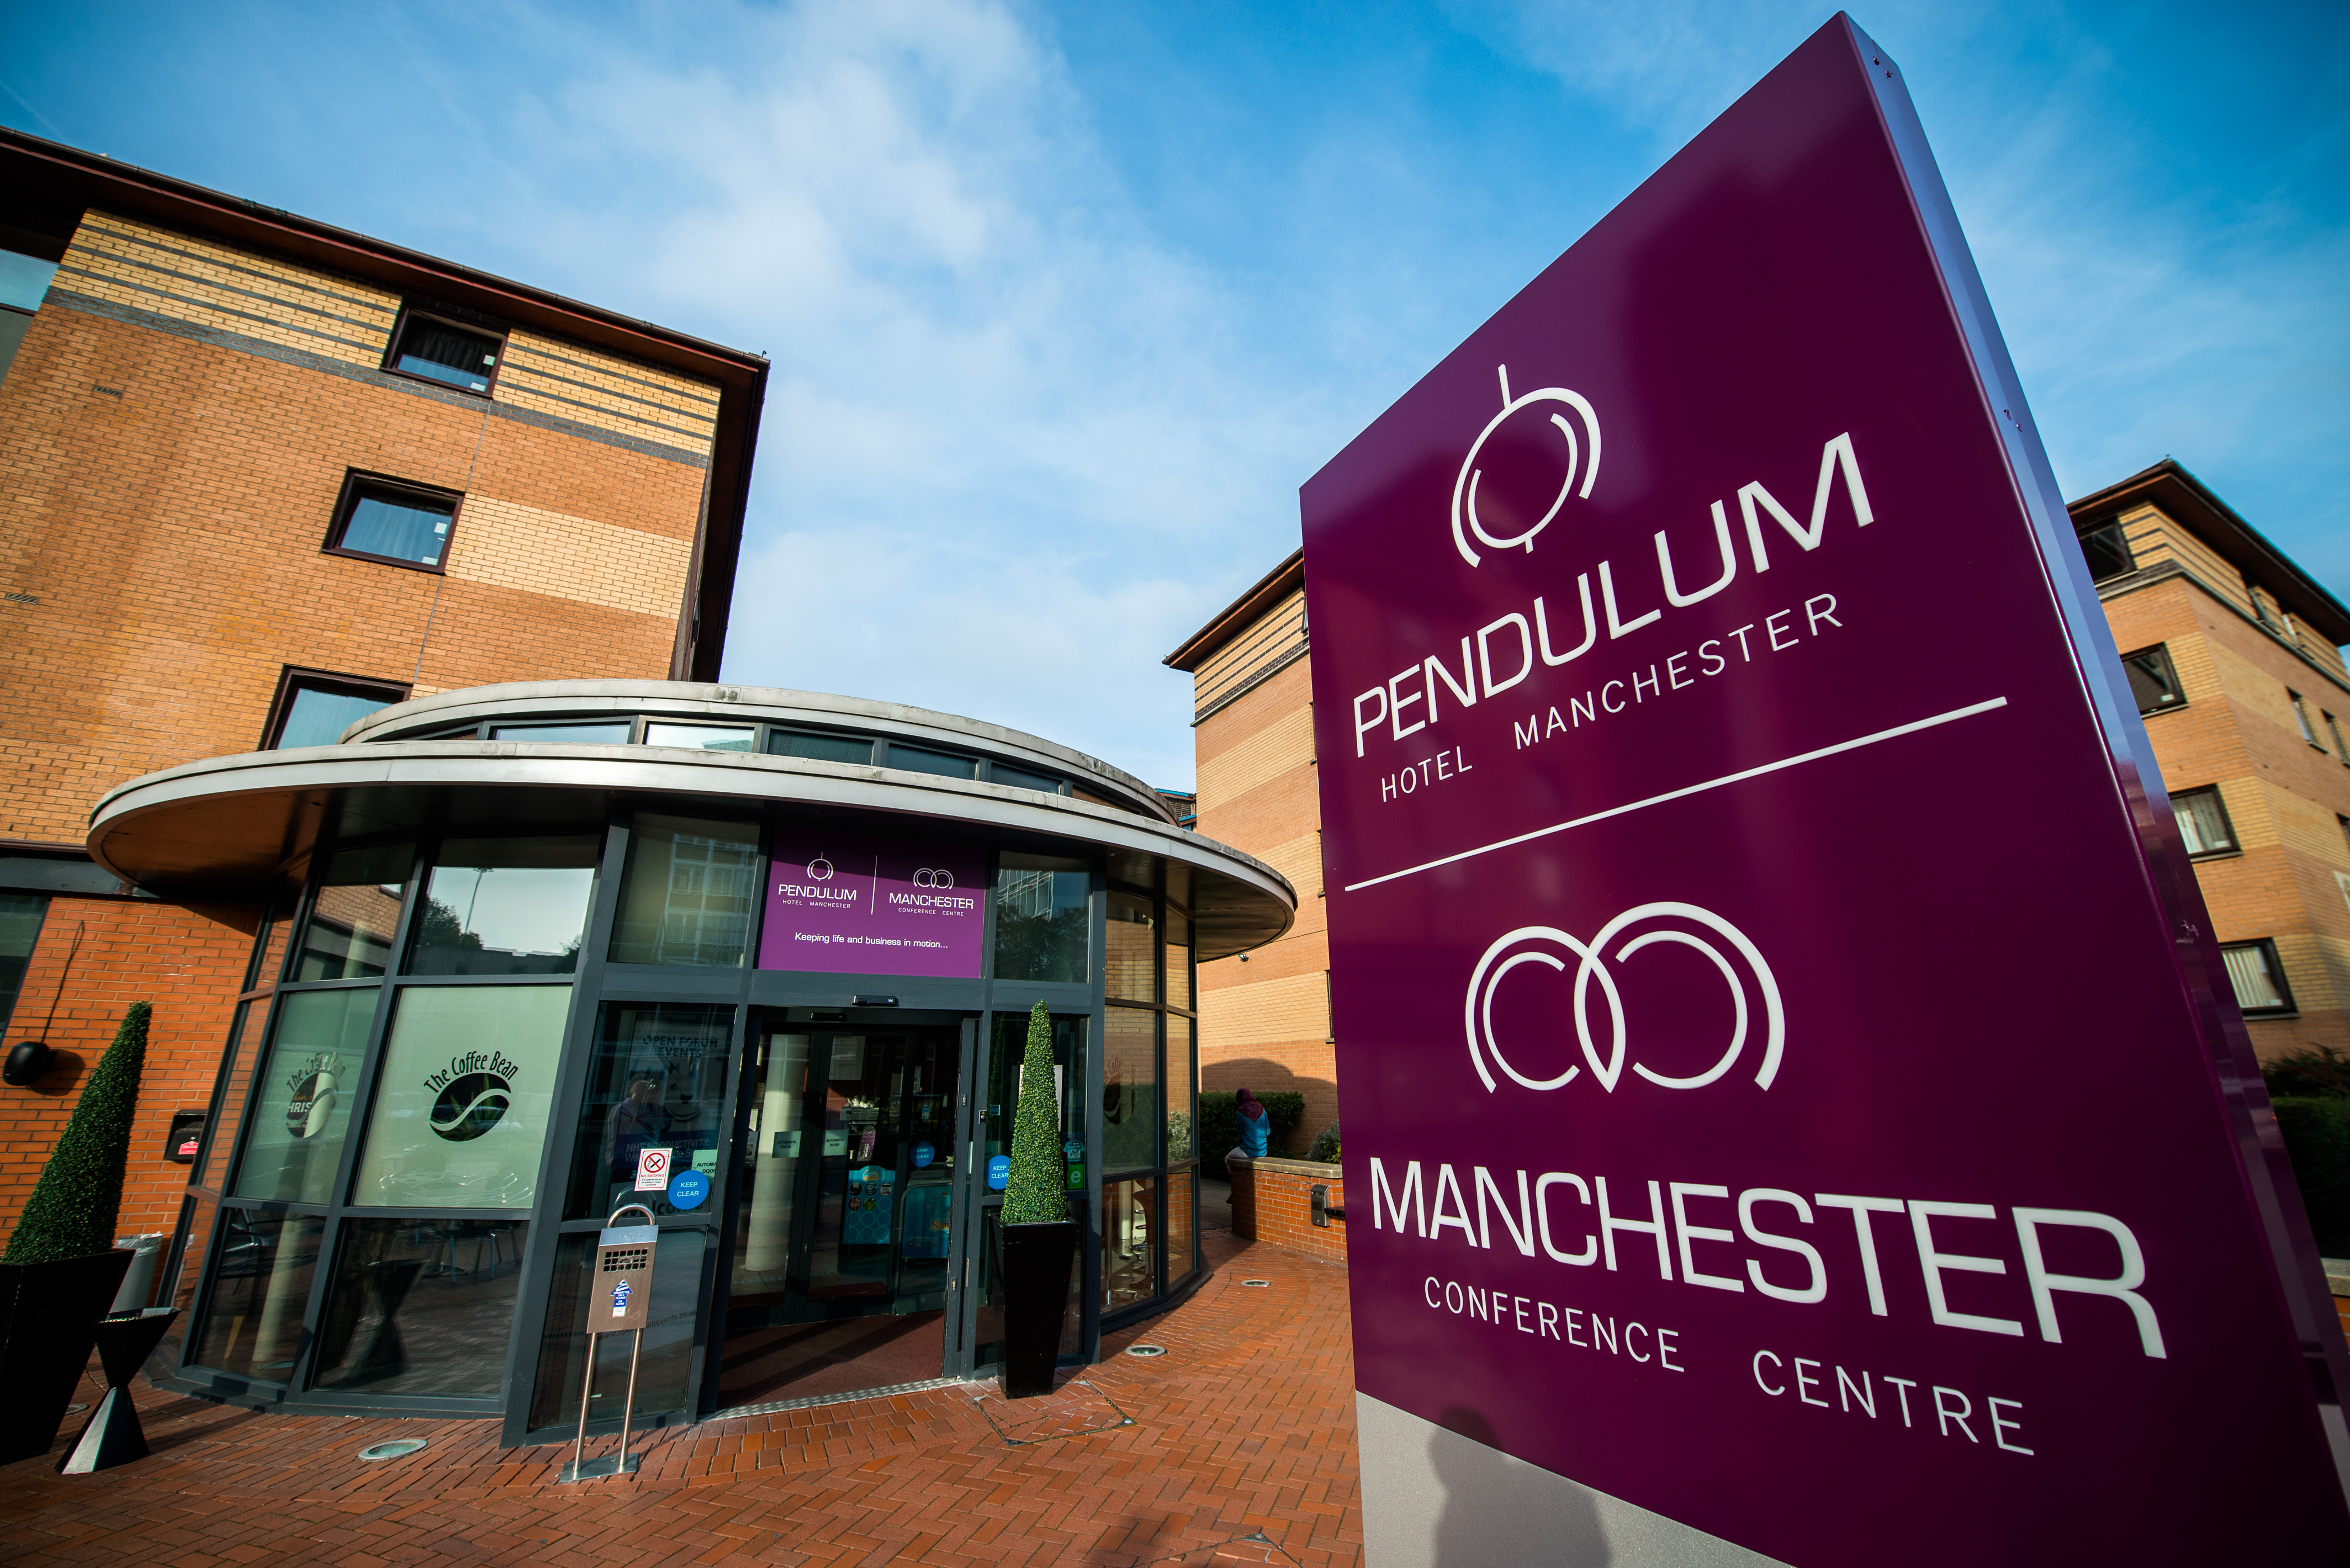 Manchester-Conference-Centre-The-Pendulum-Hotel-14.jpg